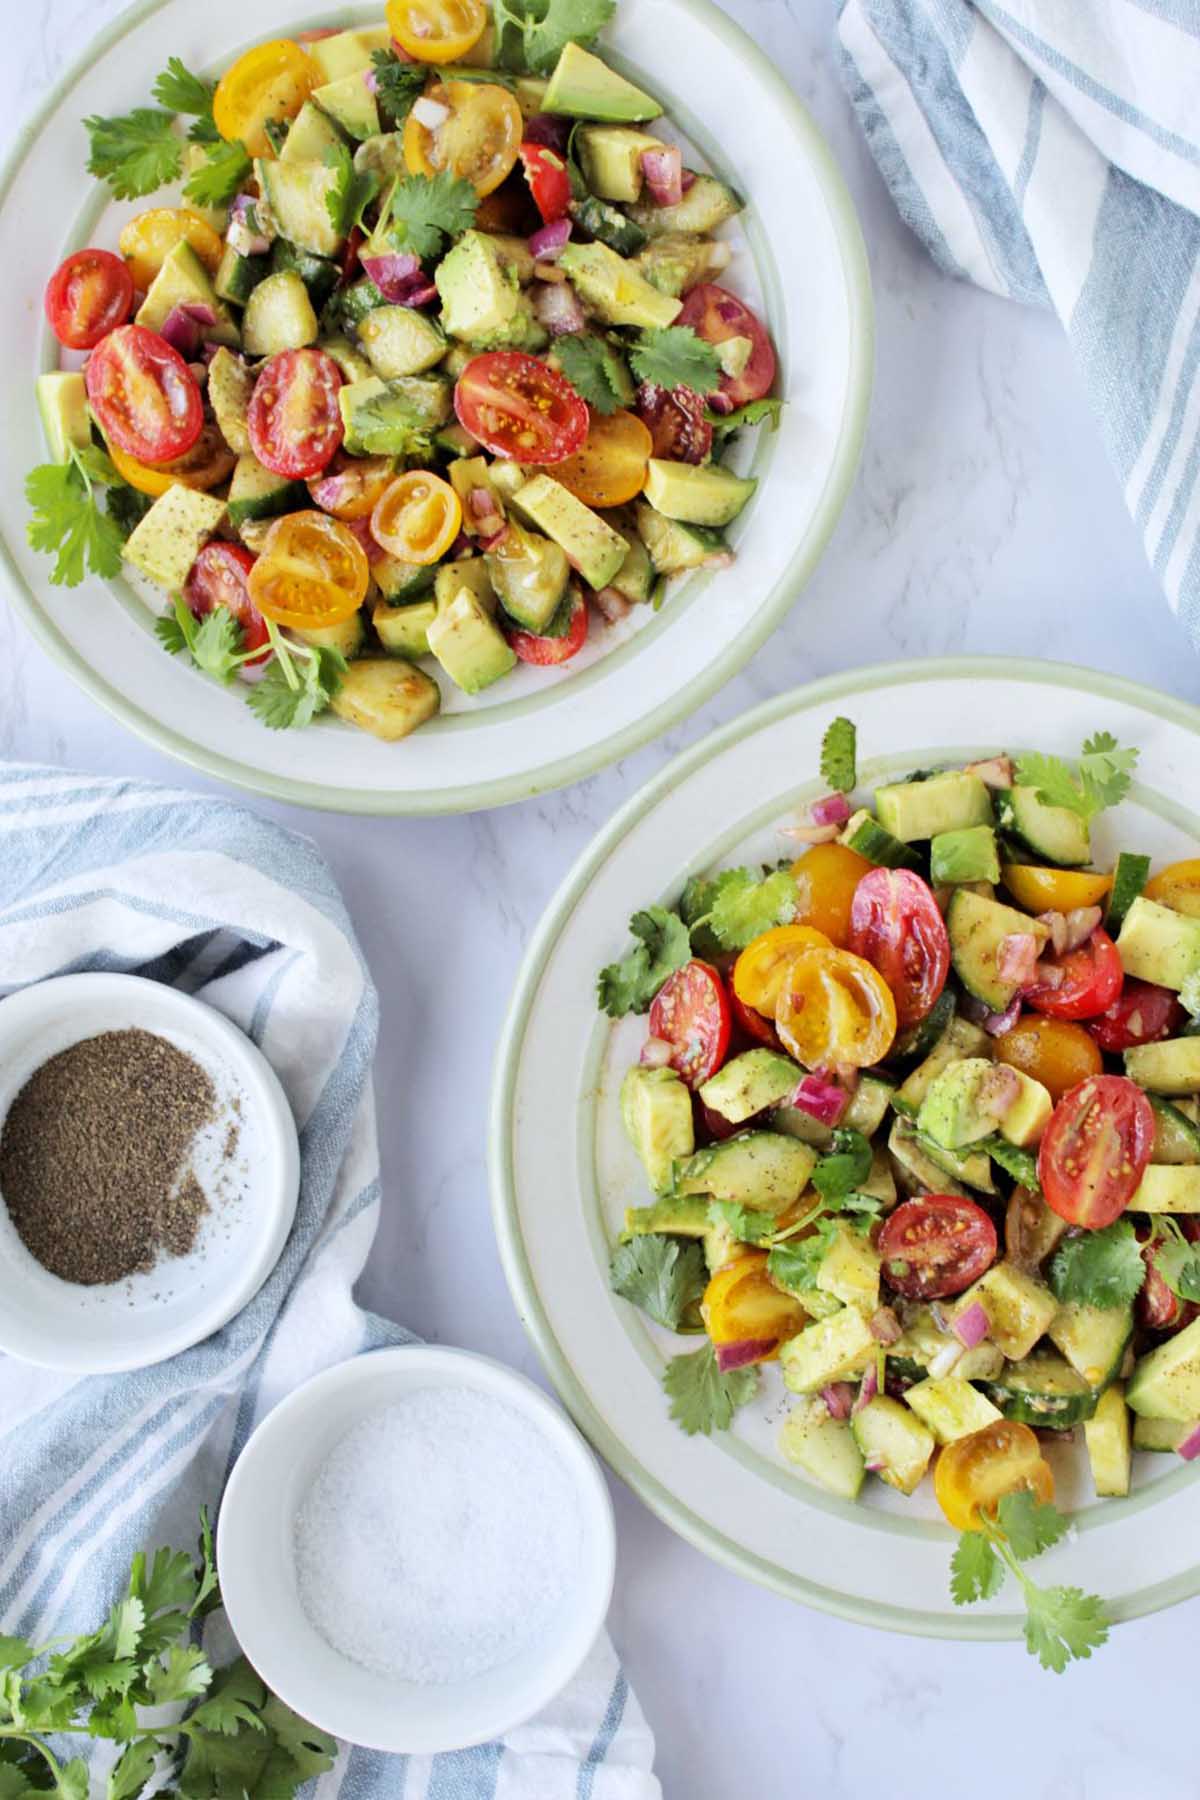 Two plates with Mexican avocado salad